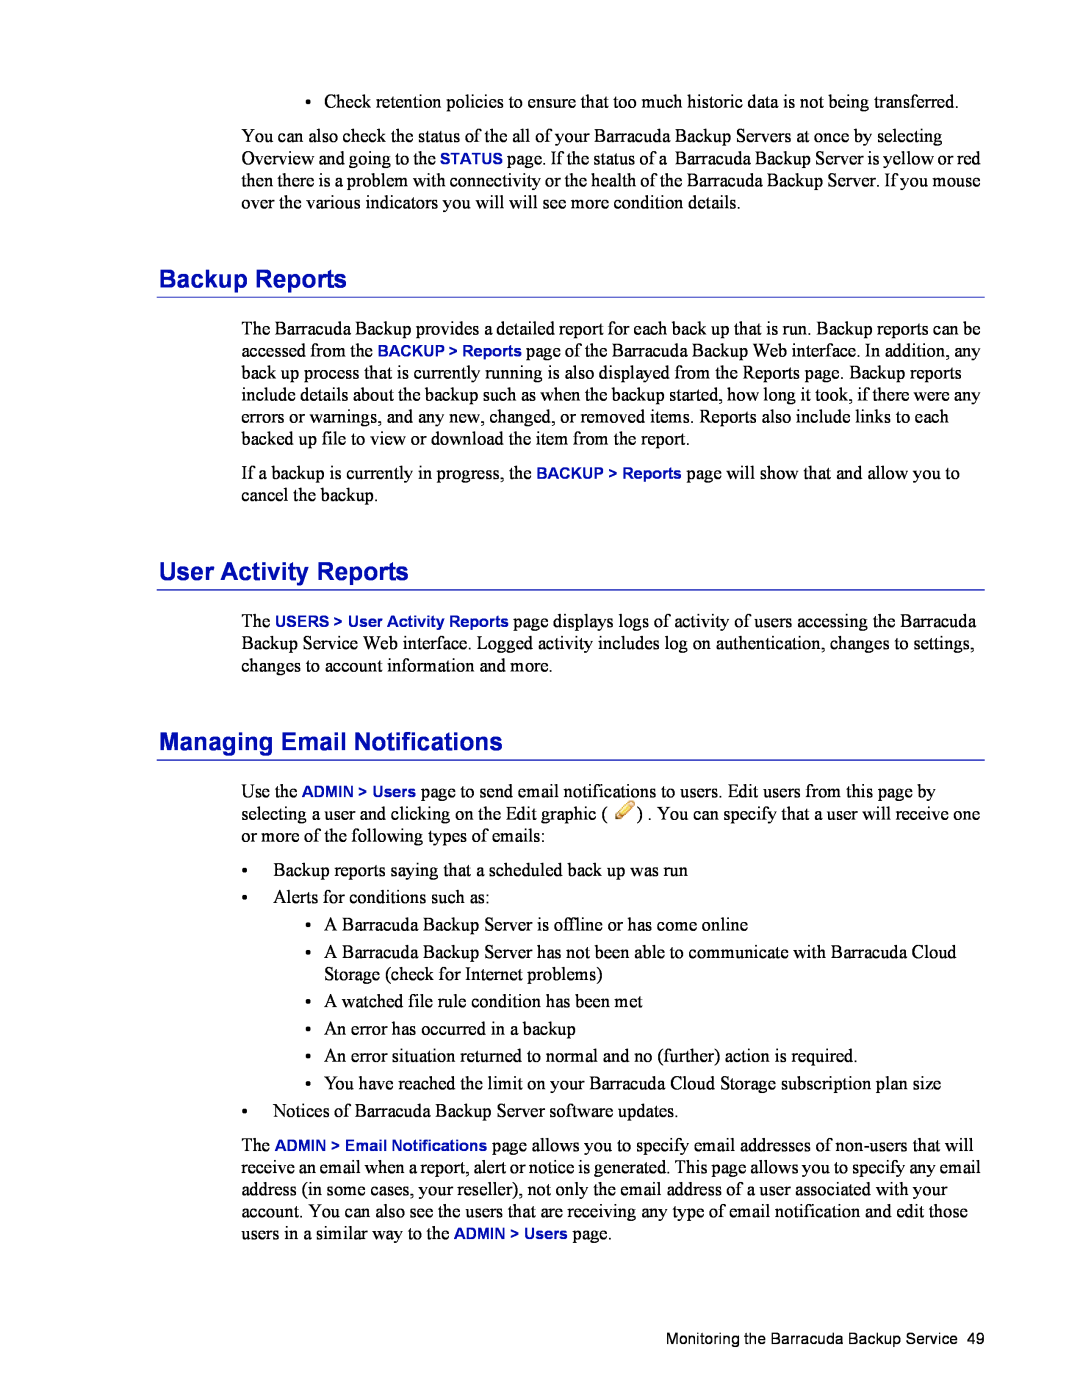 Barracuda Networks 4 manual Backup Reports, User Activity Reports, Managing Email Notifications 